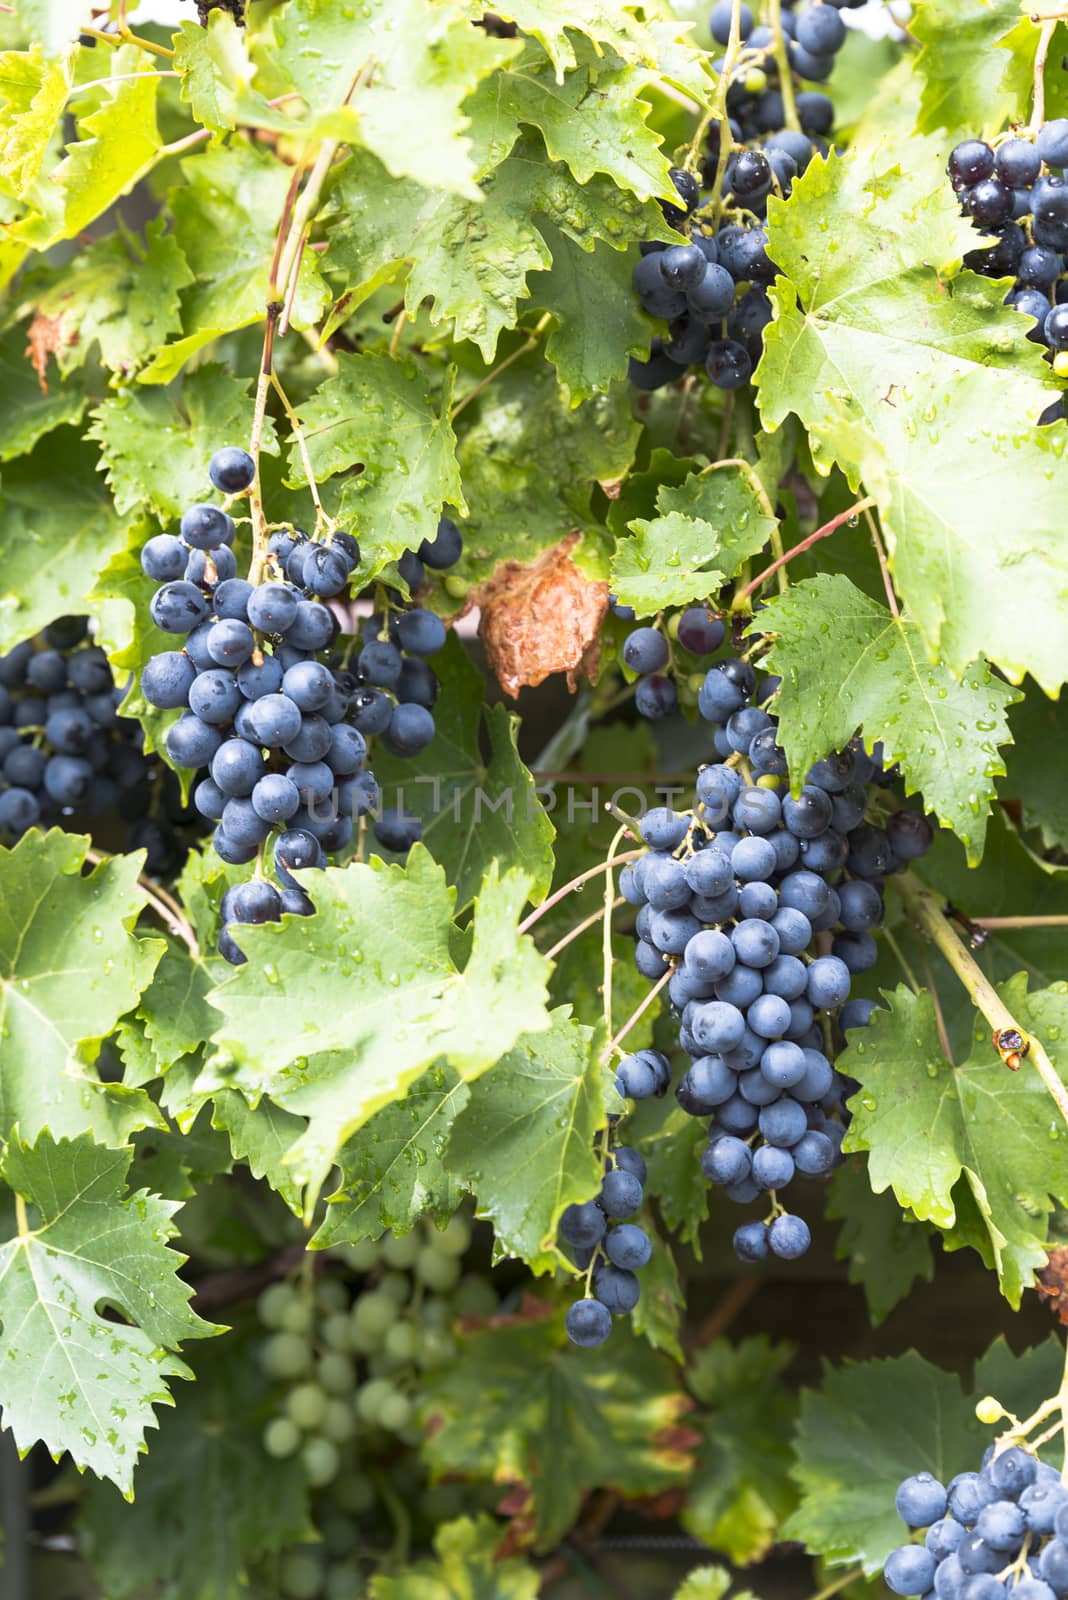 large bunches of blue grapes hang ready to be picked for grape juice or red wine